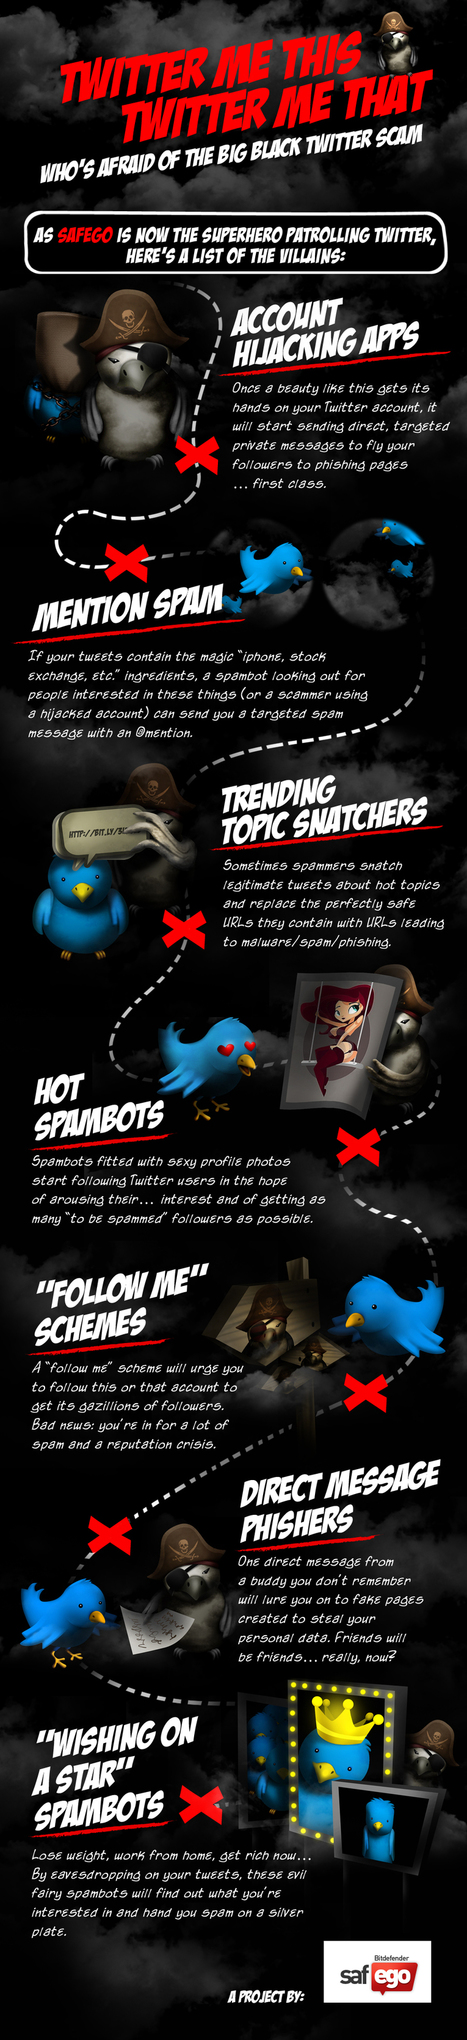 [Infographic] Types of Twitter Scams | 21st Century Learning and Teaching | Scoop.it